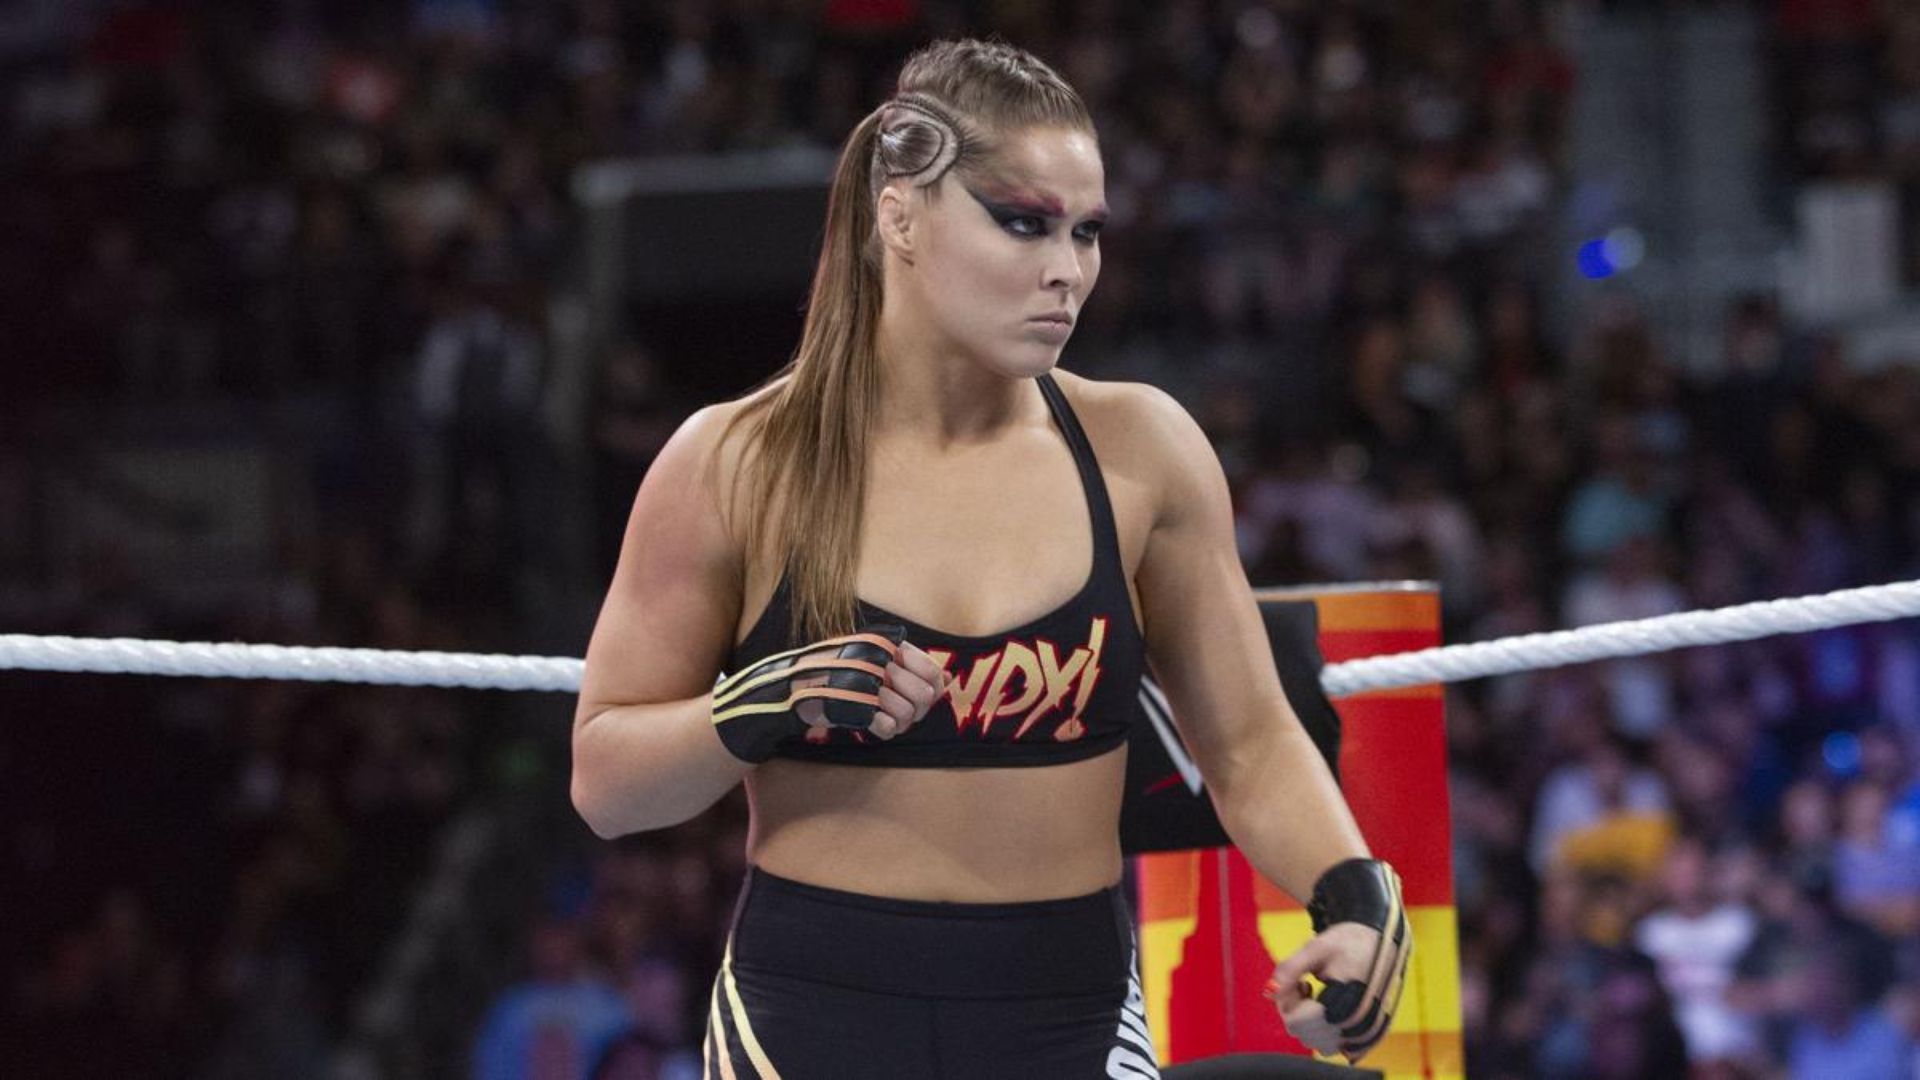 Ronda has looked rusty in the ring since her return